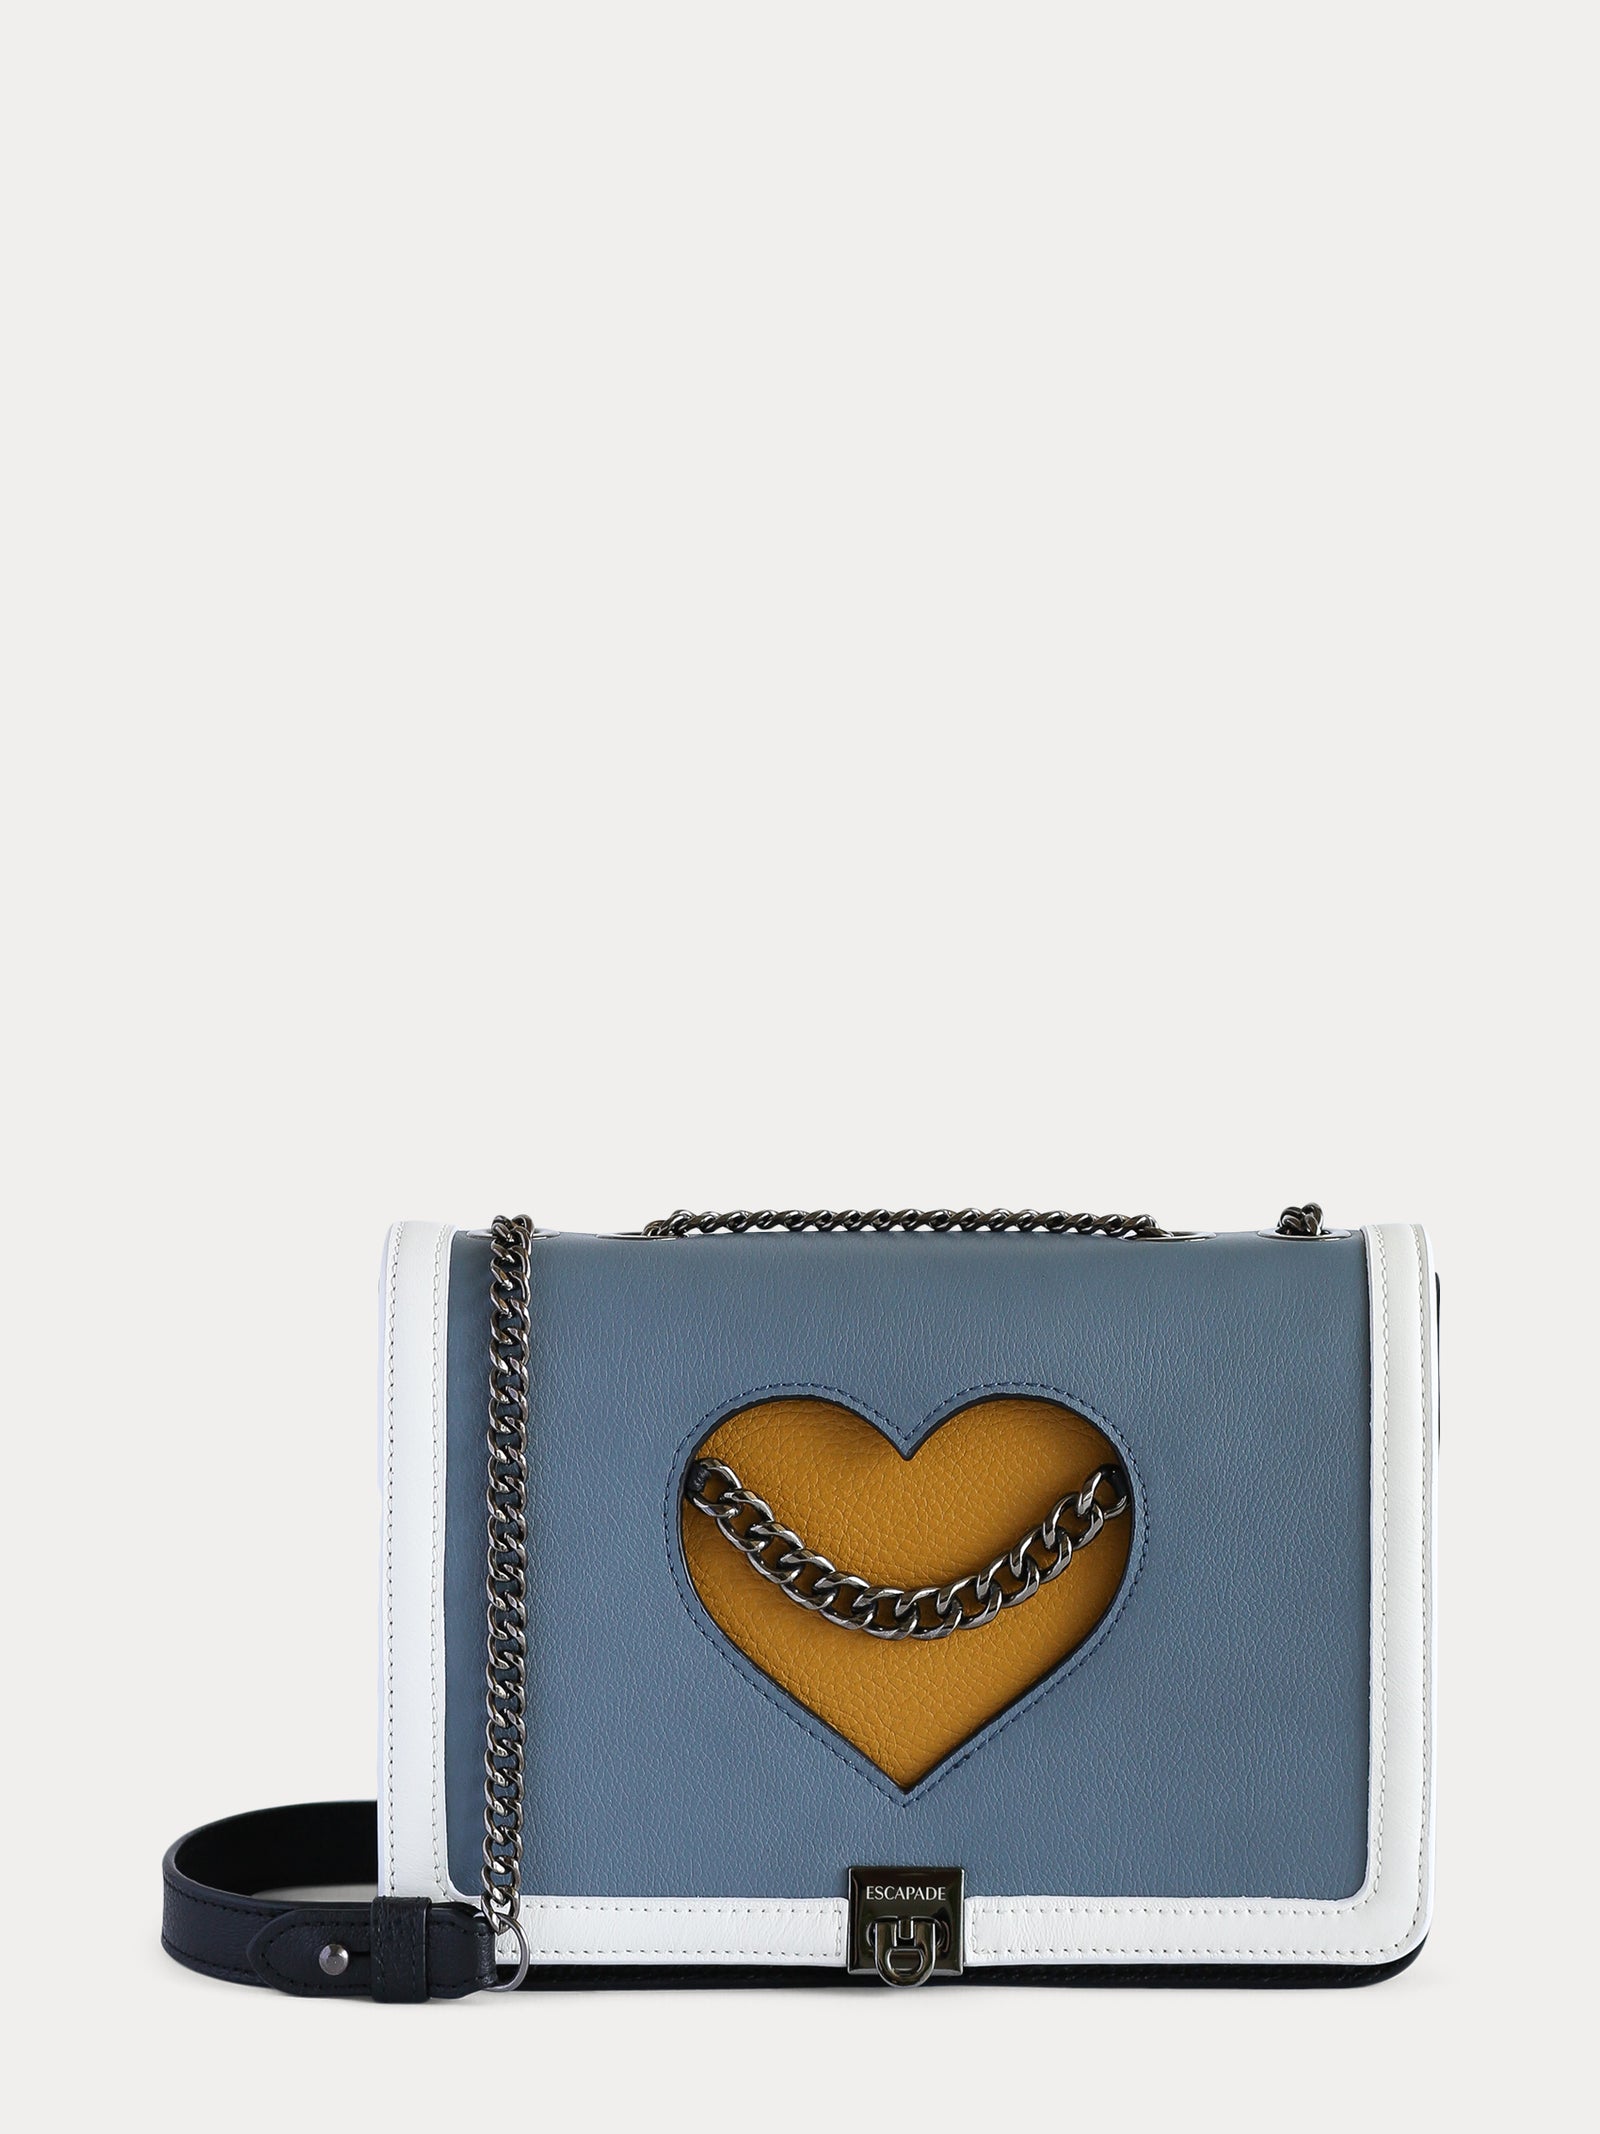 sustainable leather bag for women with blue flap and yellow mustard pocket